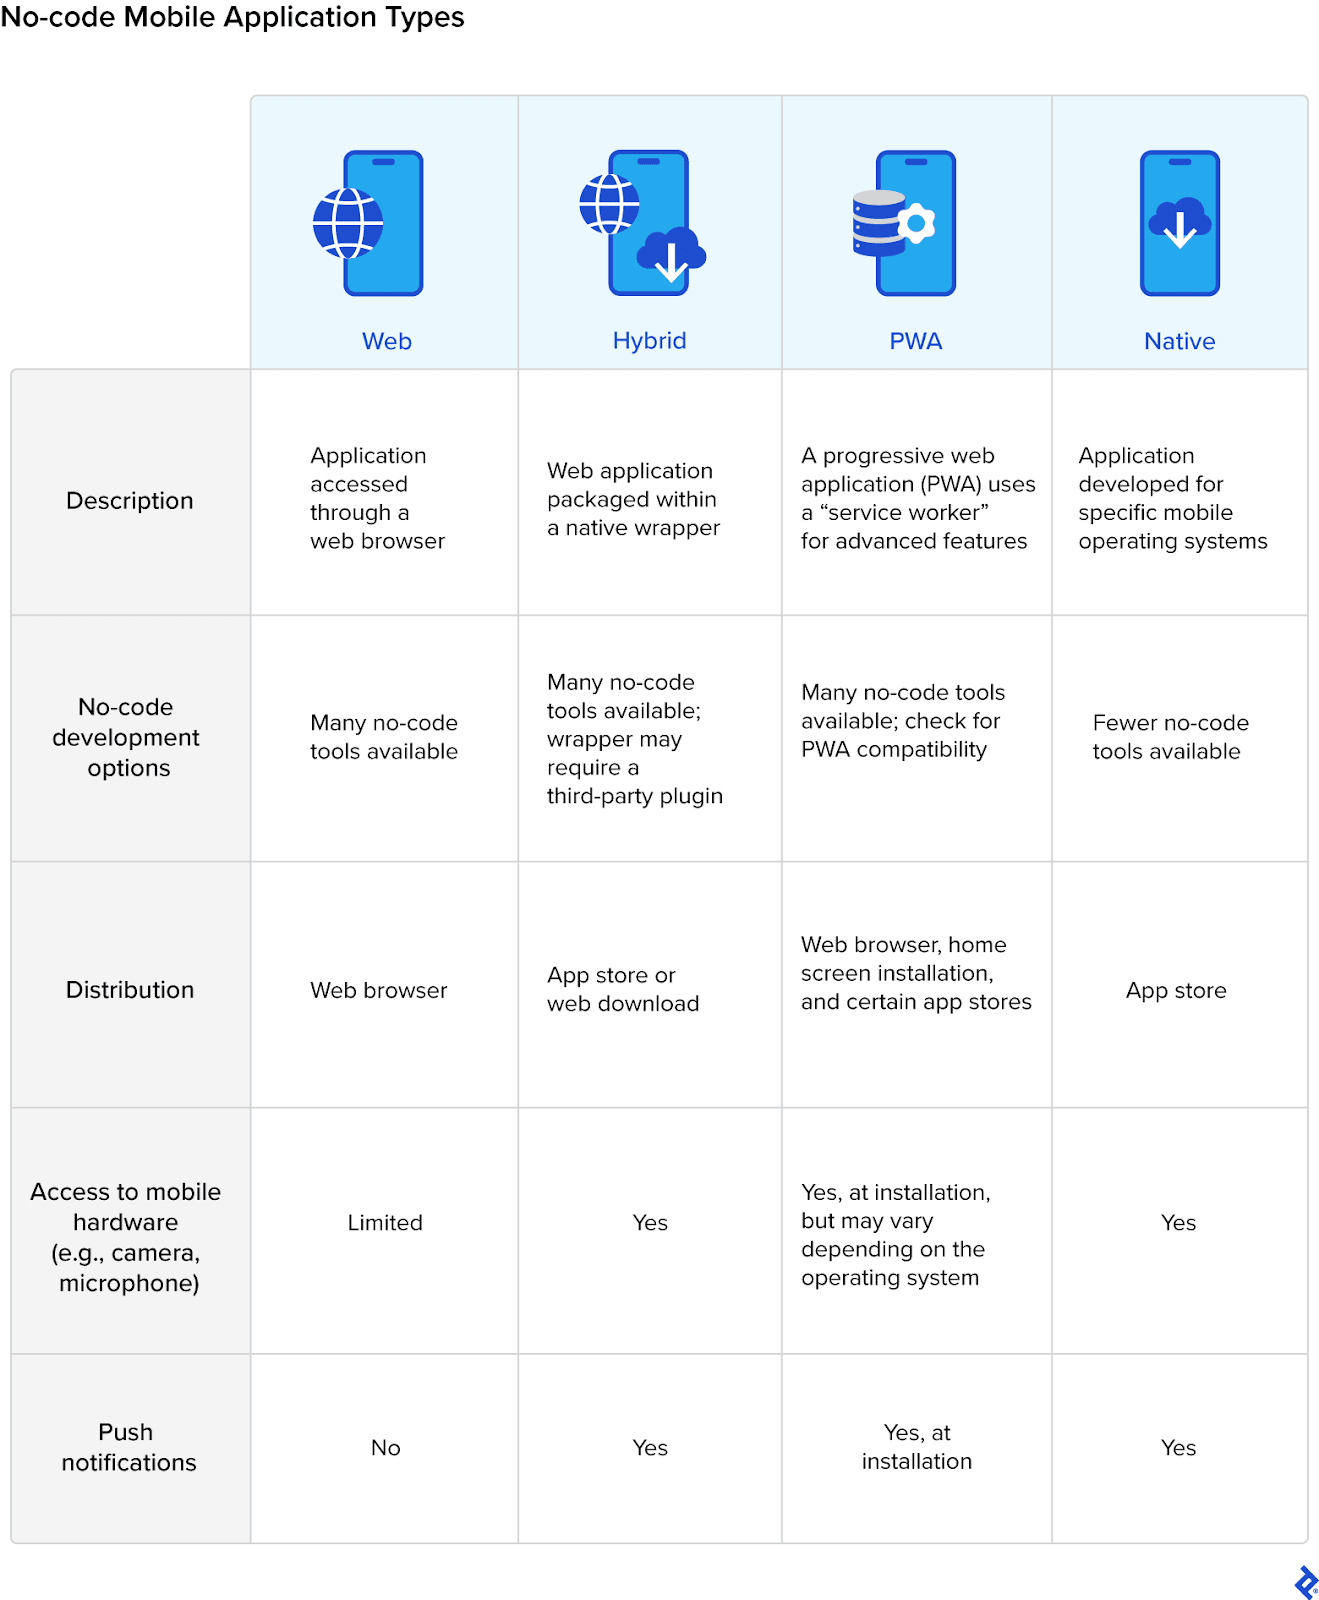 Comparison of web, hybrid, PWA, and native mobile apps and their capabilities, which differ according to distribution, hardware access, and other functions.